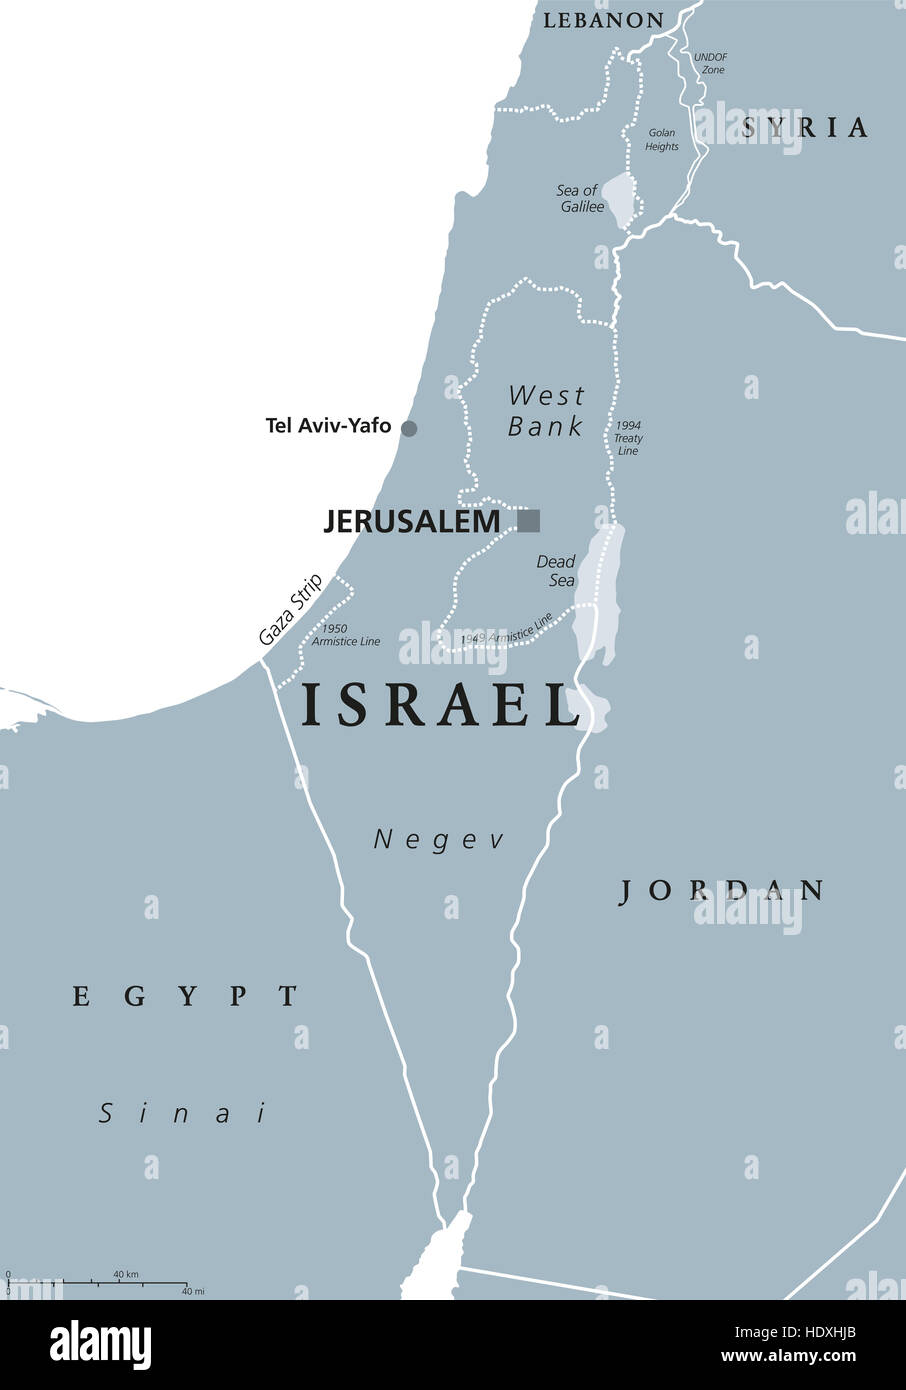 Israel political map with capital Jerusalem and neighbors. State of Israel, country in Middle East with Palestinian territories. Stock Photo